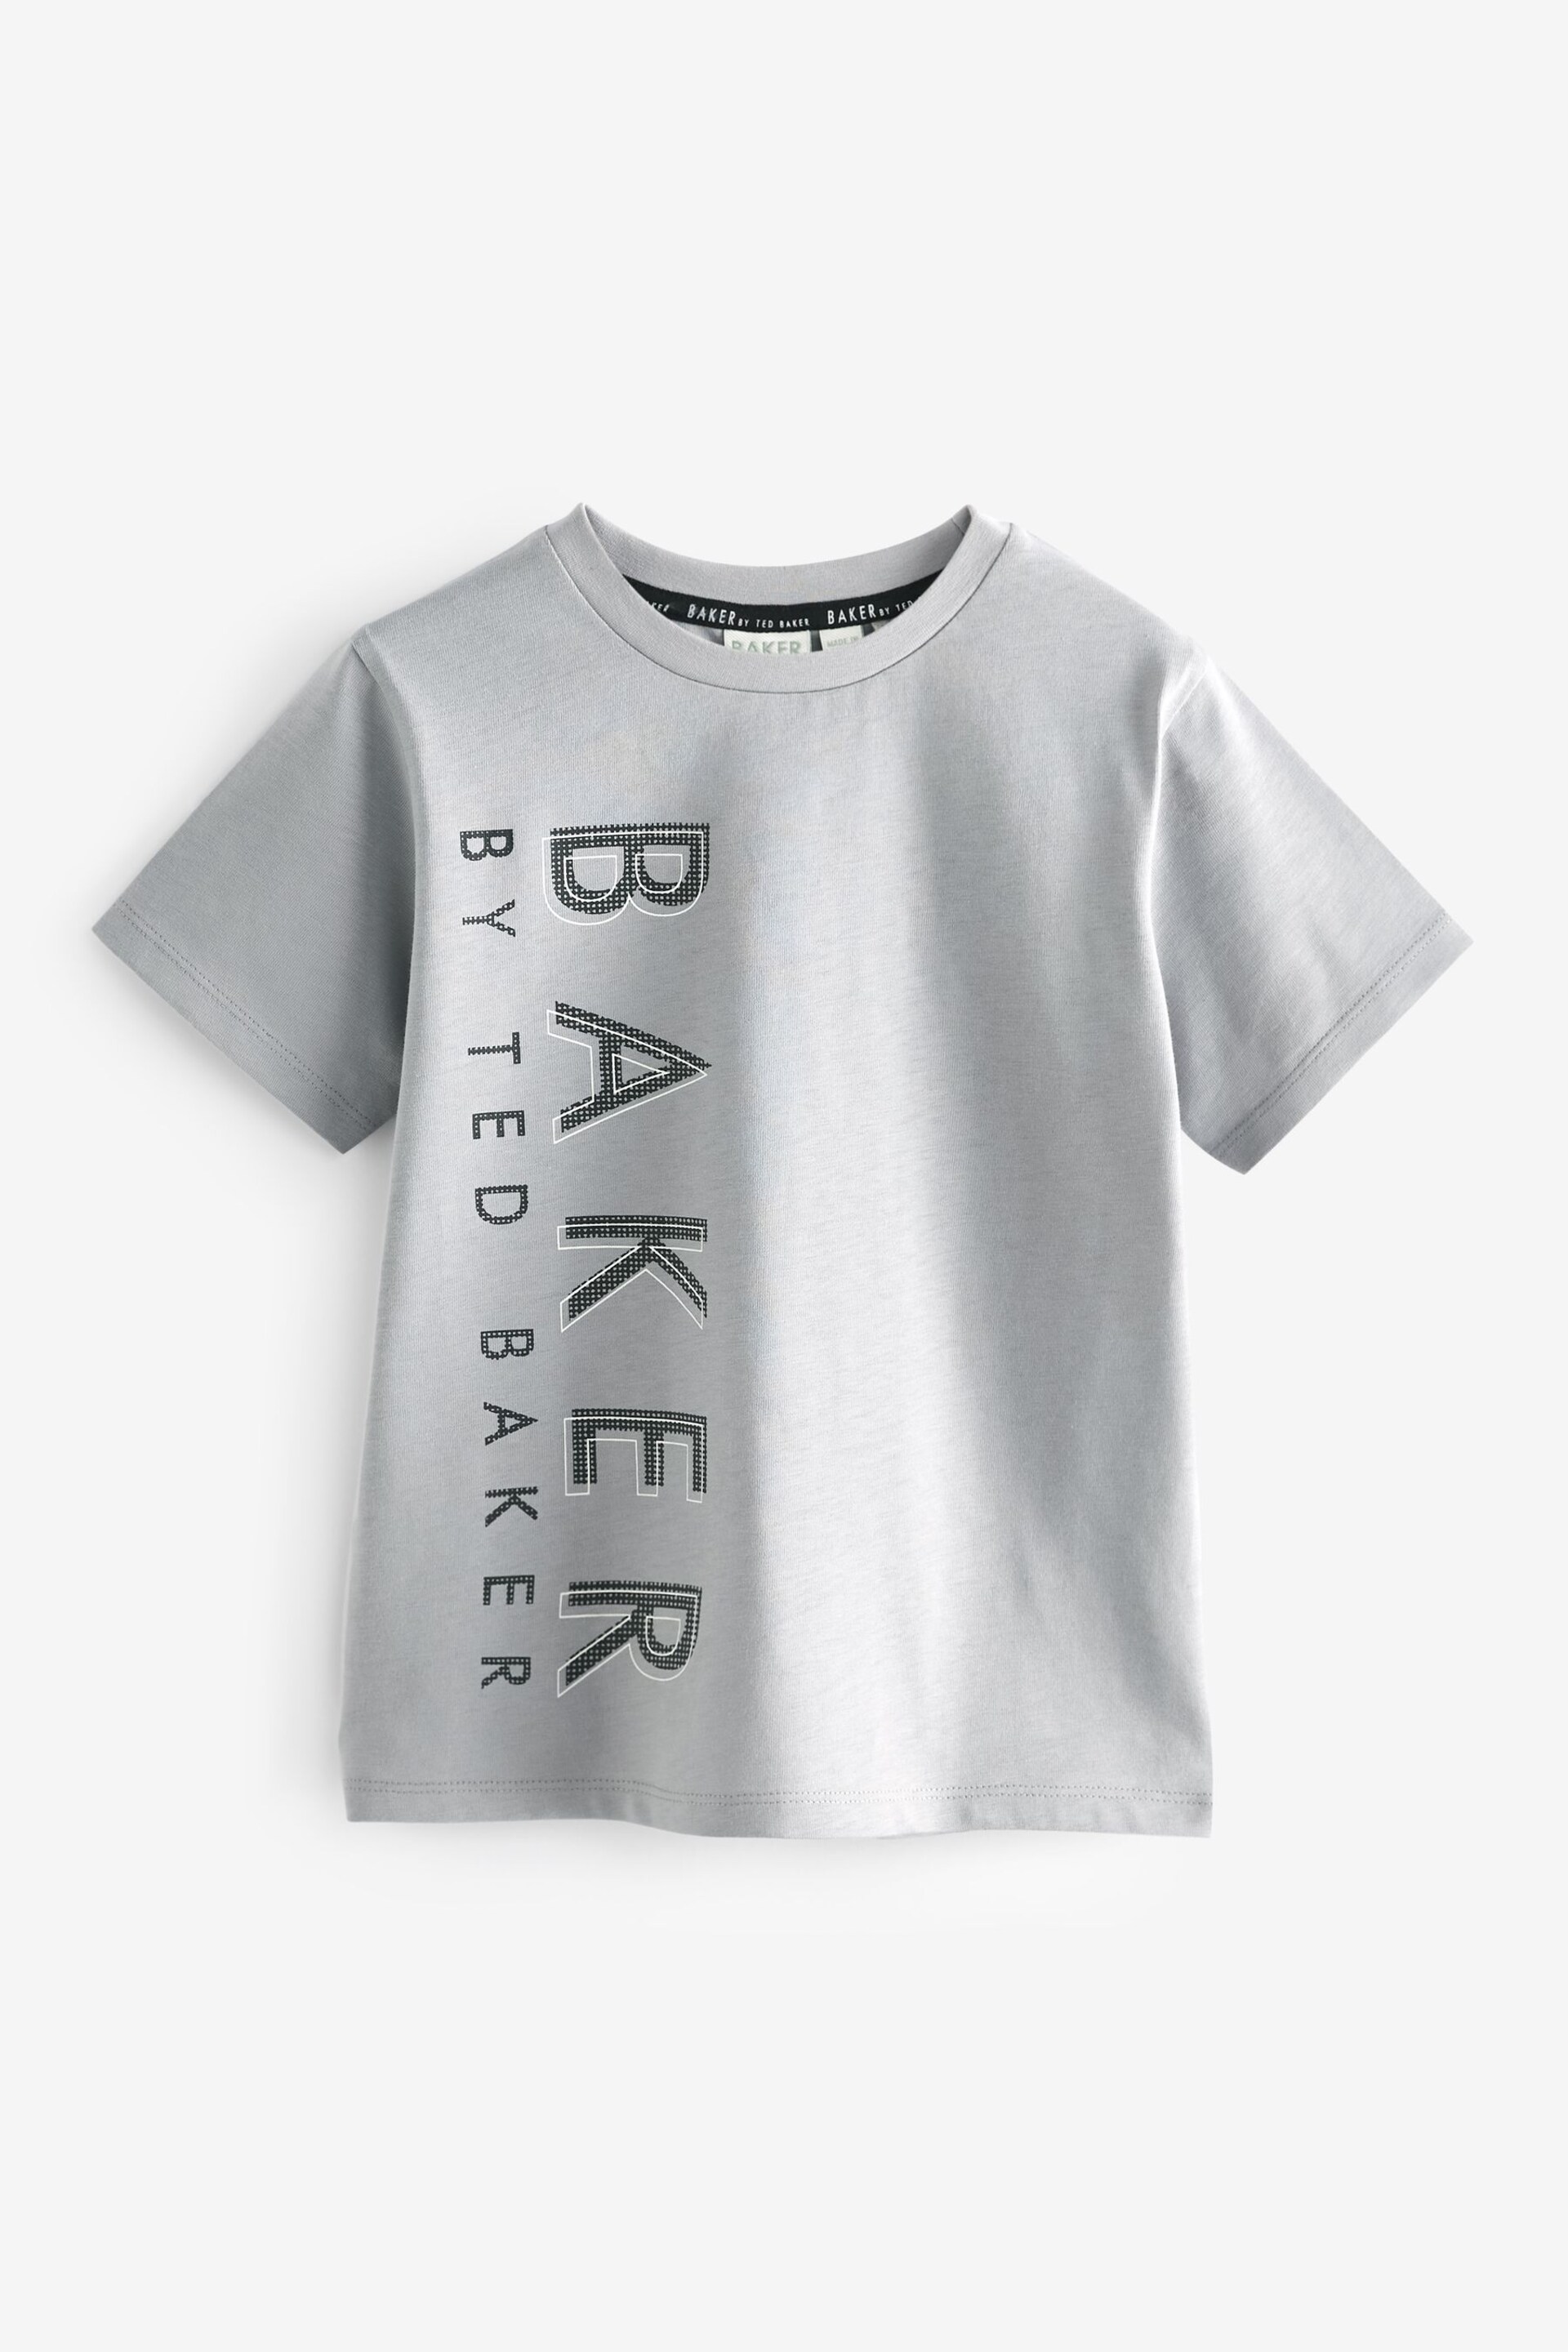 Baker by Ted Baker Graphic T-Shirts 3 Pack - Image 4 of 8